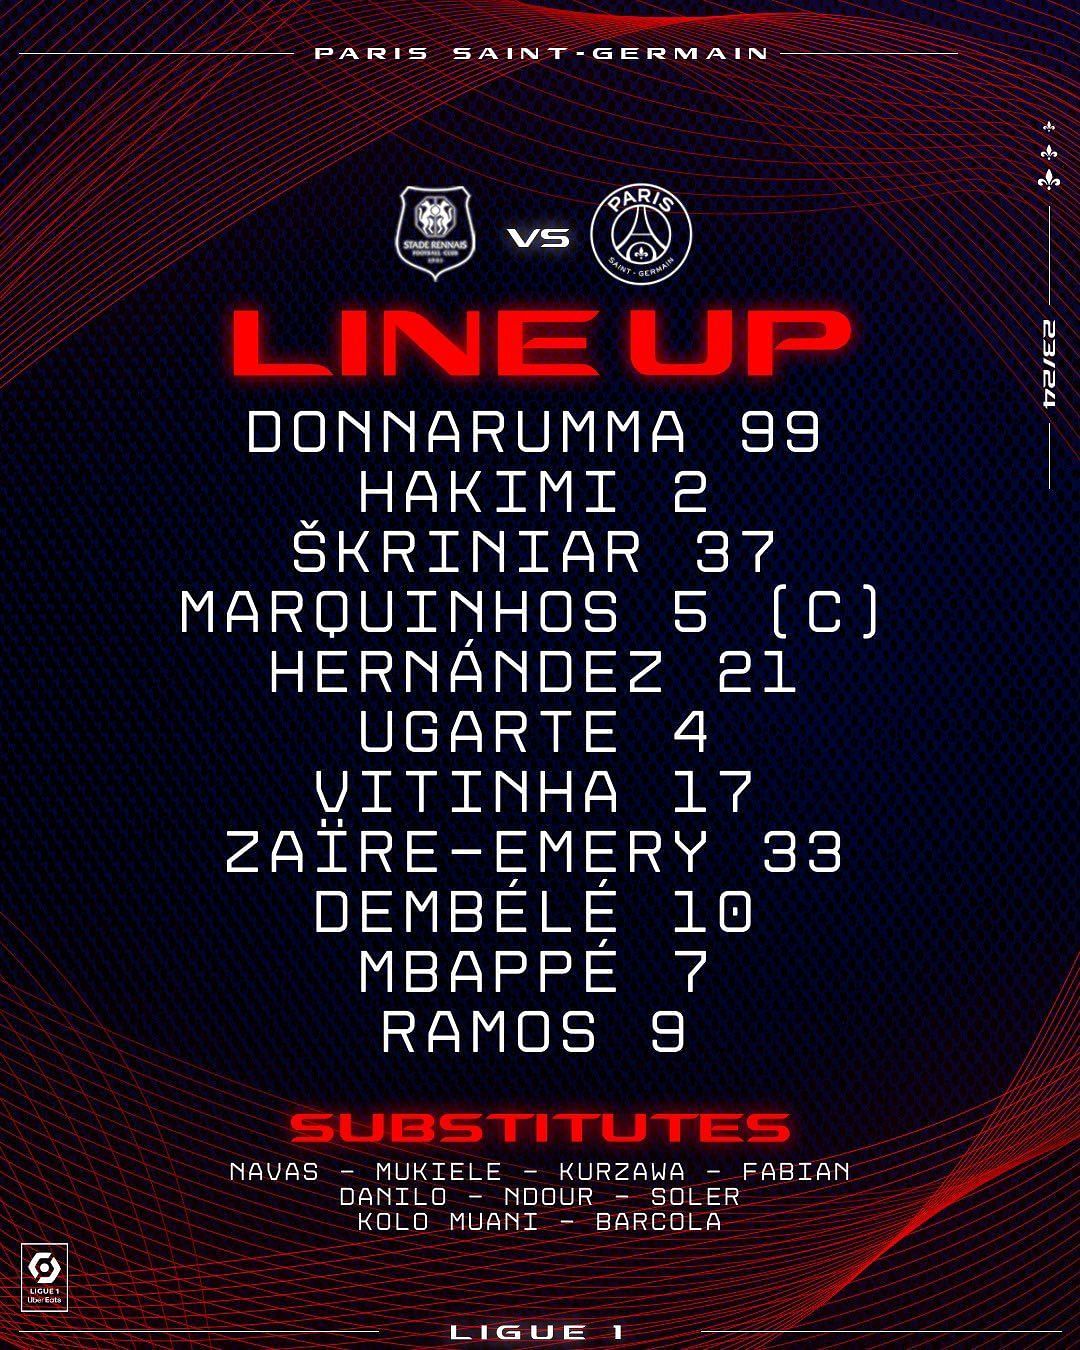 PSG posted their lineup on their X (Twitter) account prior to kick-off.